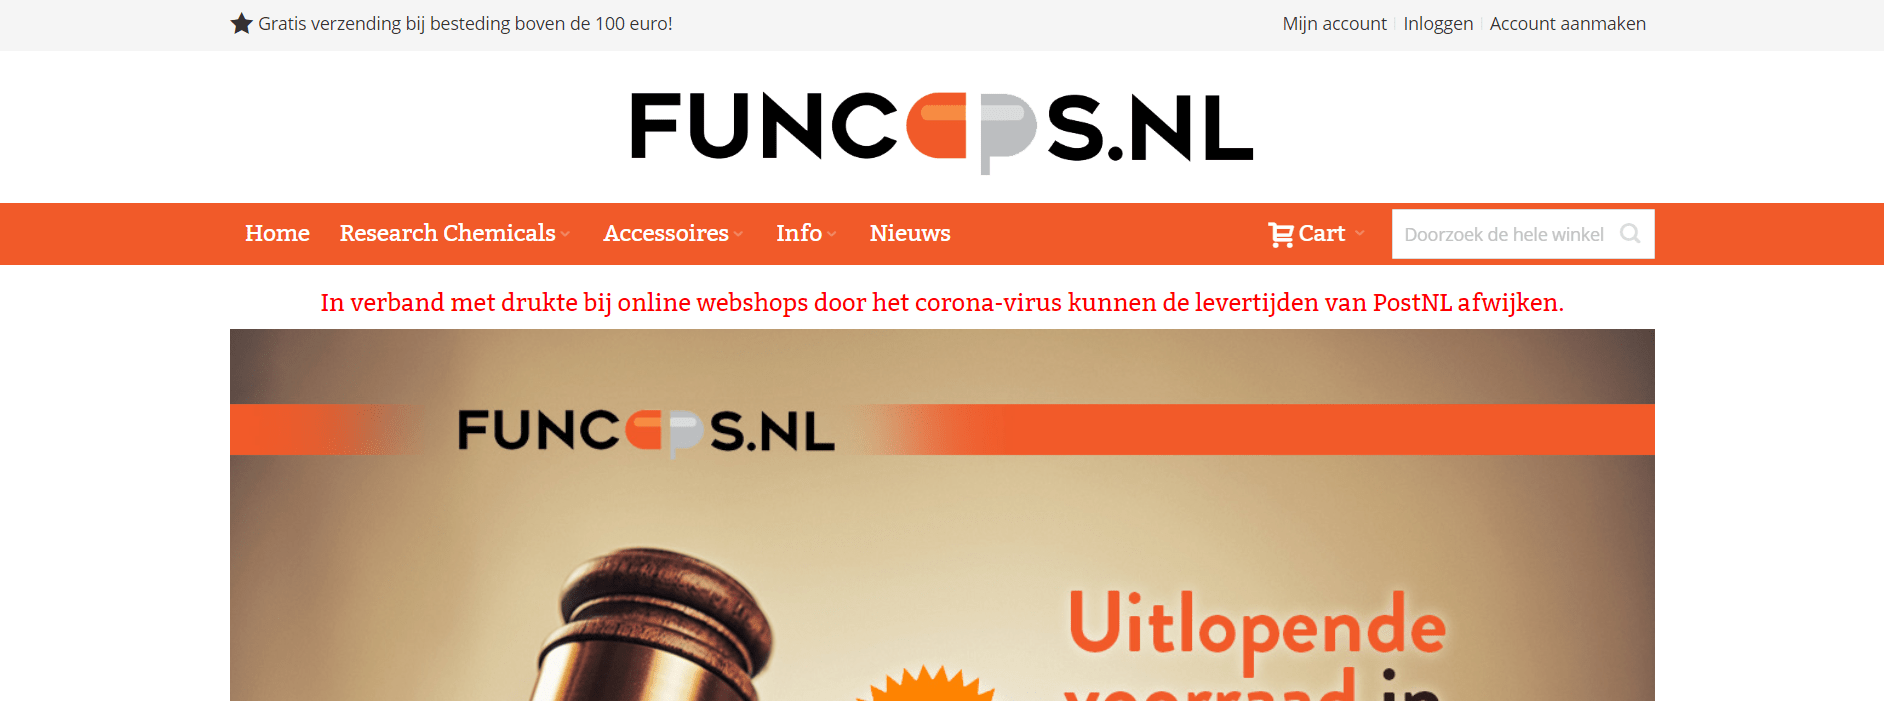 research chemicals website Funcaps.nl